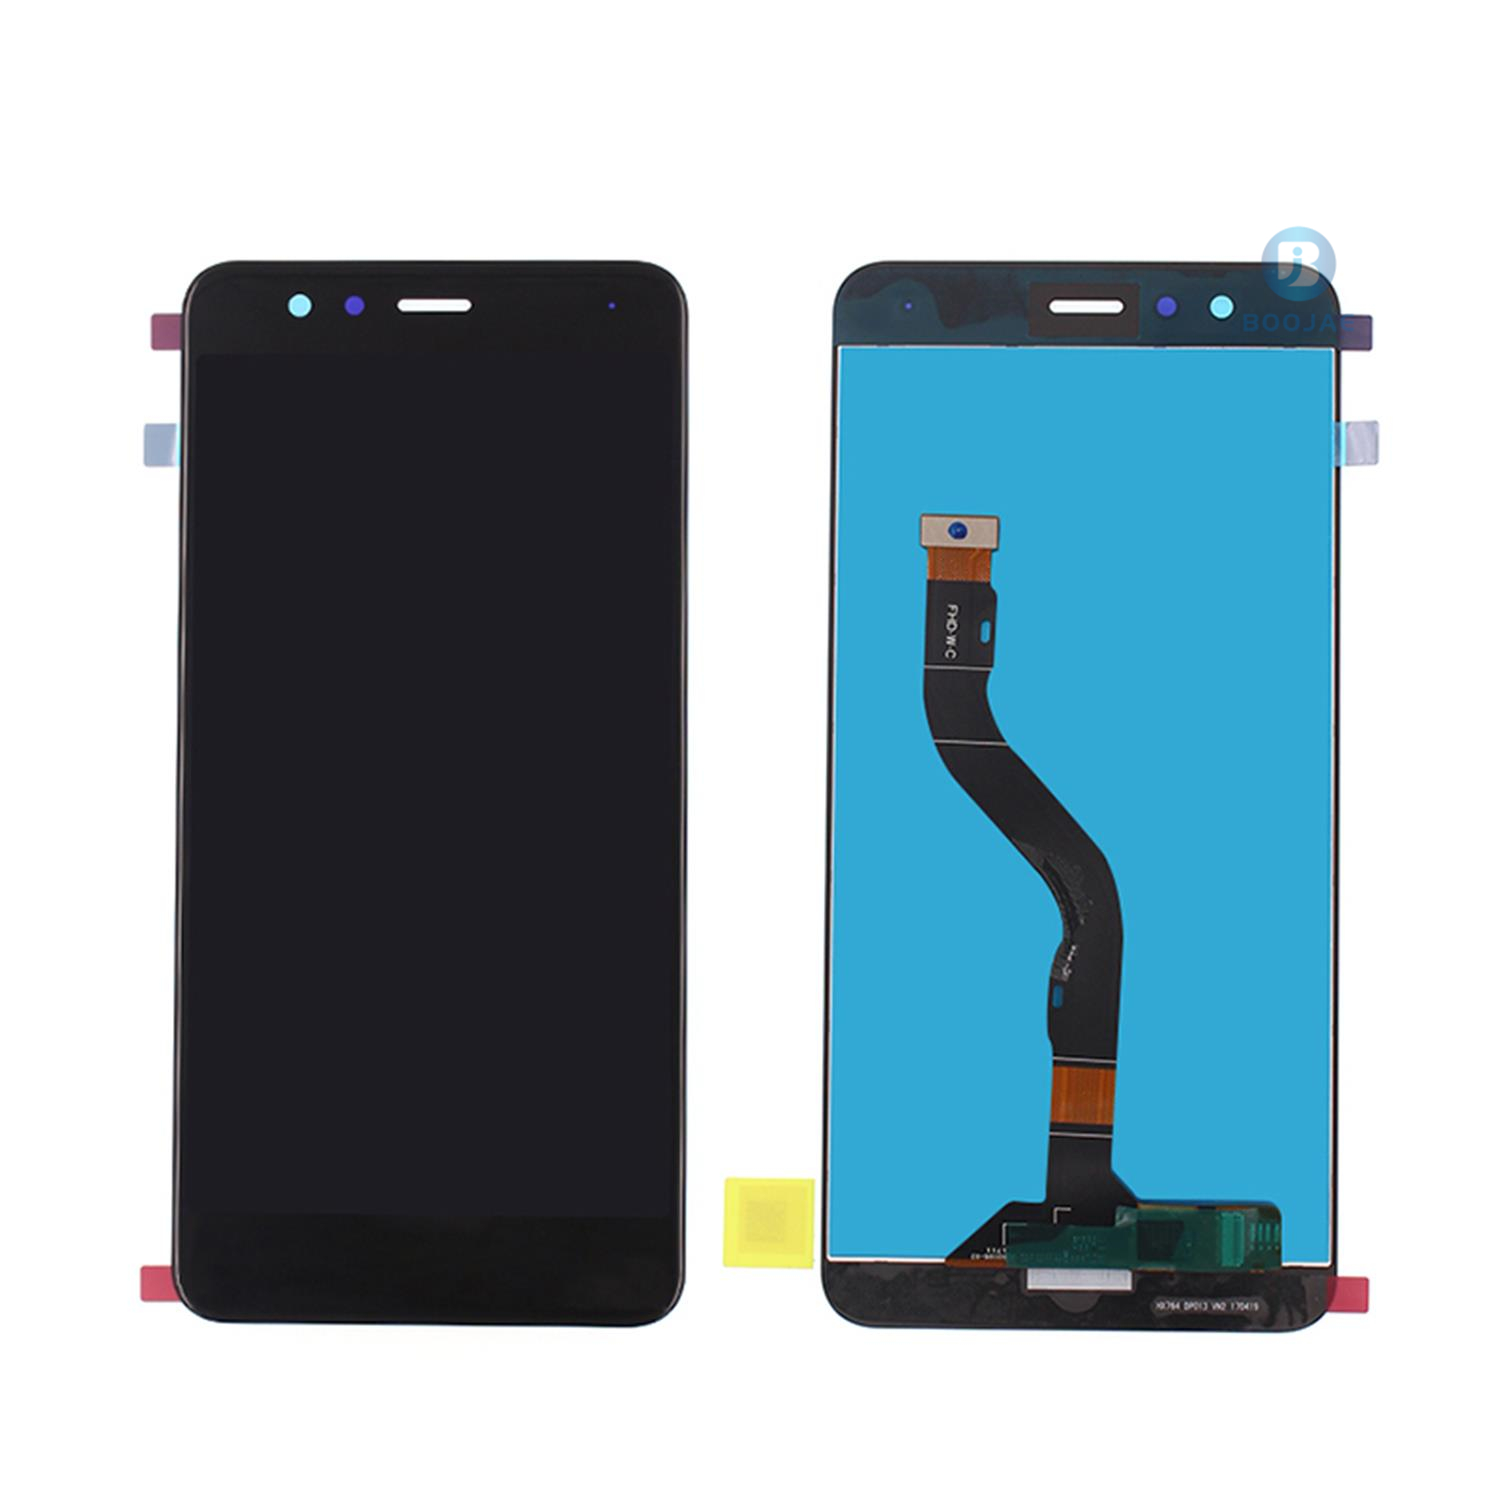 Huawei P10 Lite LCD Screen Display and Touch Panel Digitizer Assembly Replacement